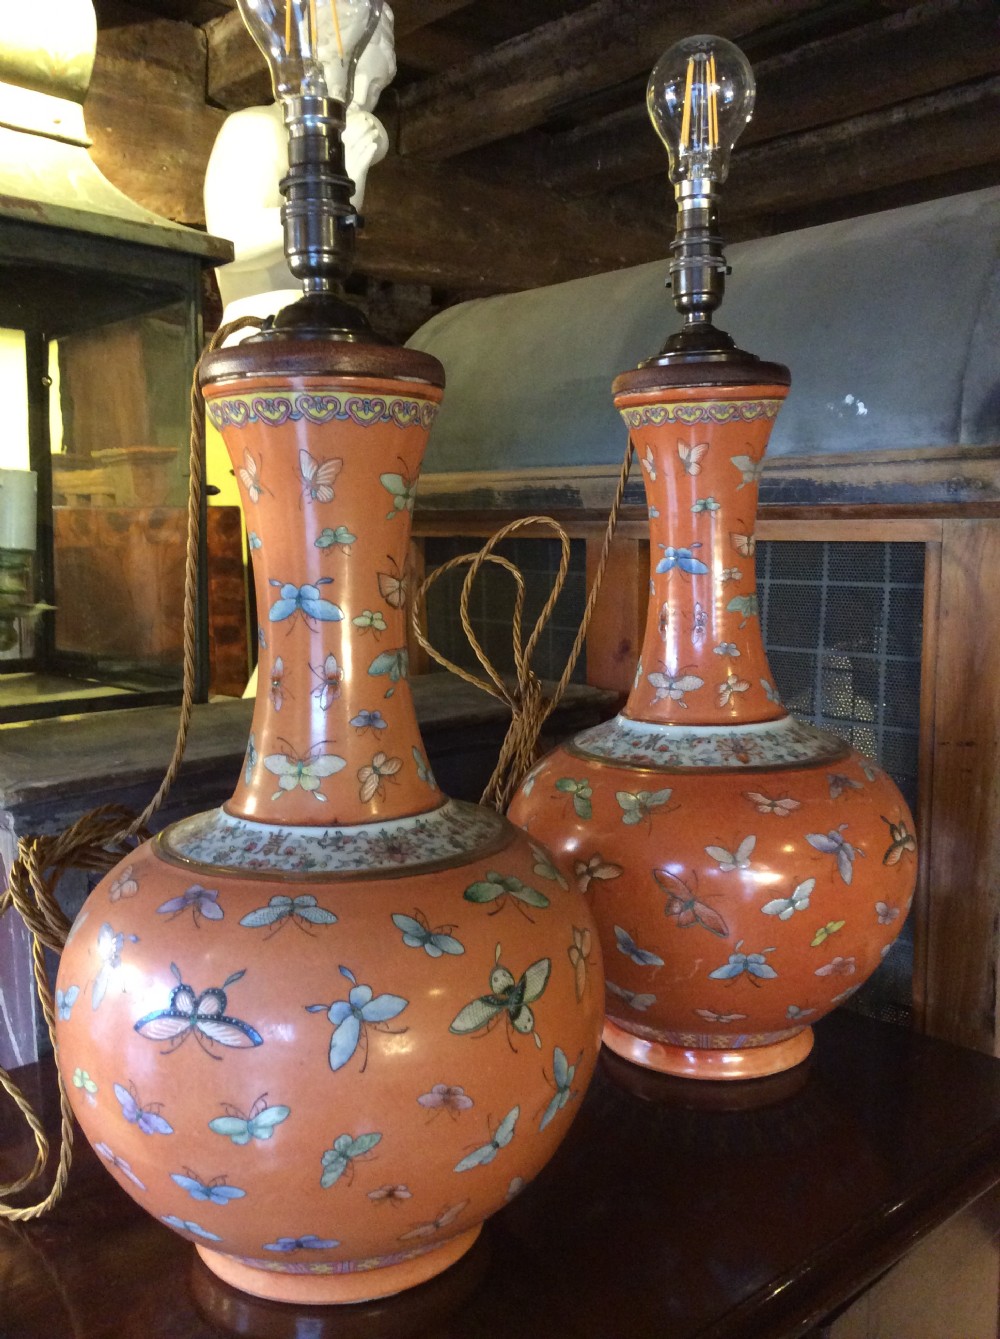 a very near pair of lamps both with thehundred butterfly pattern